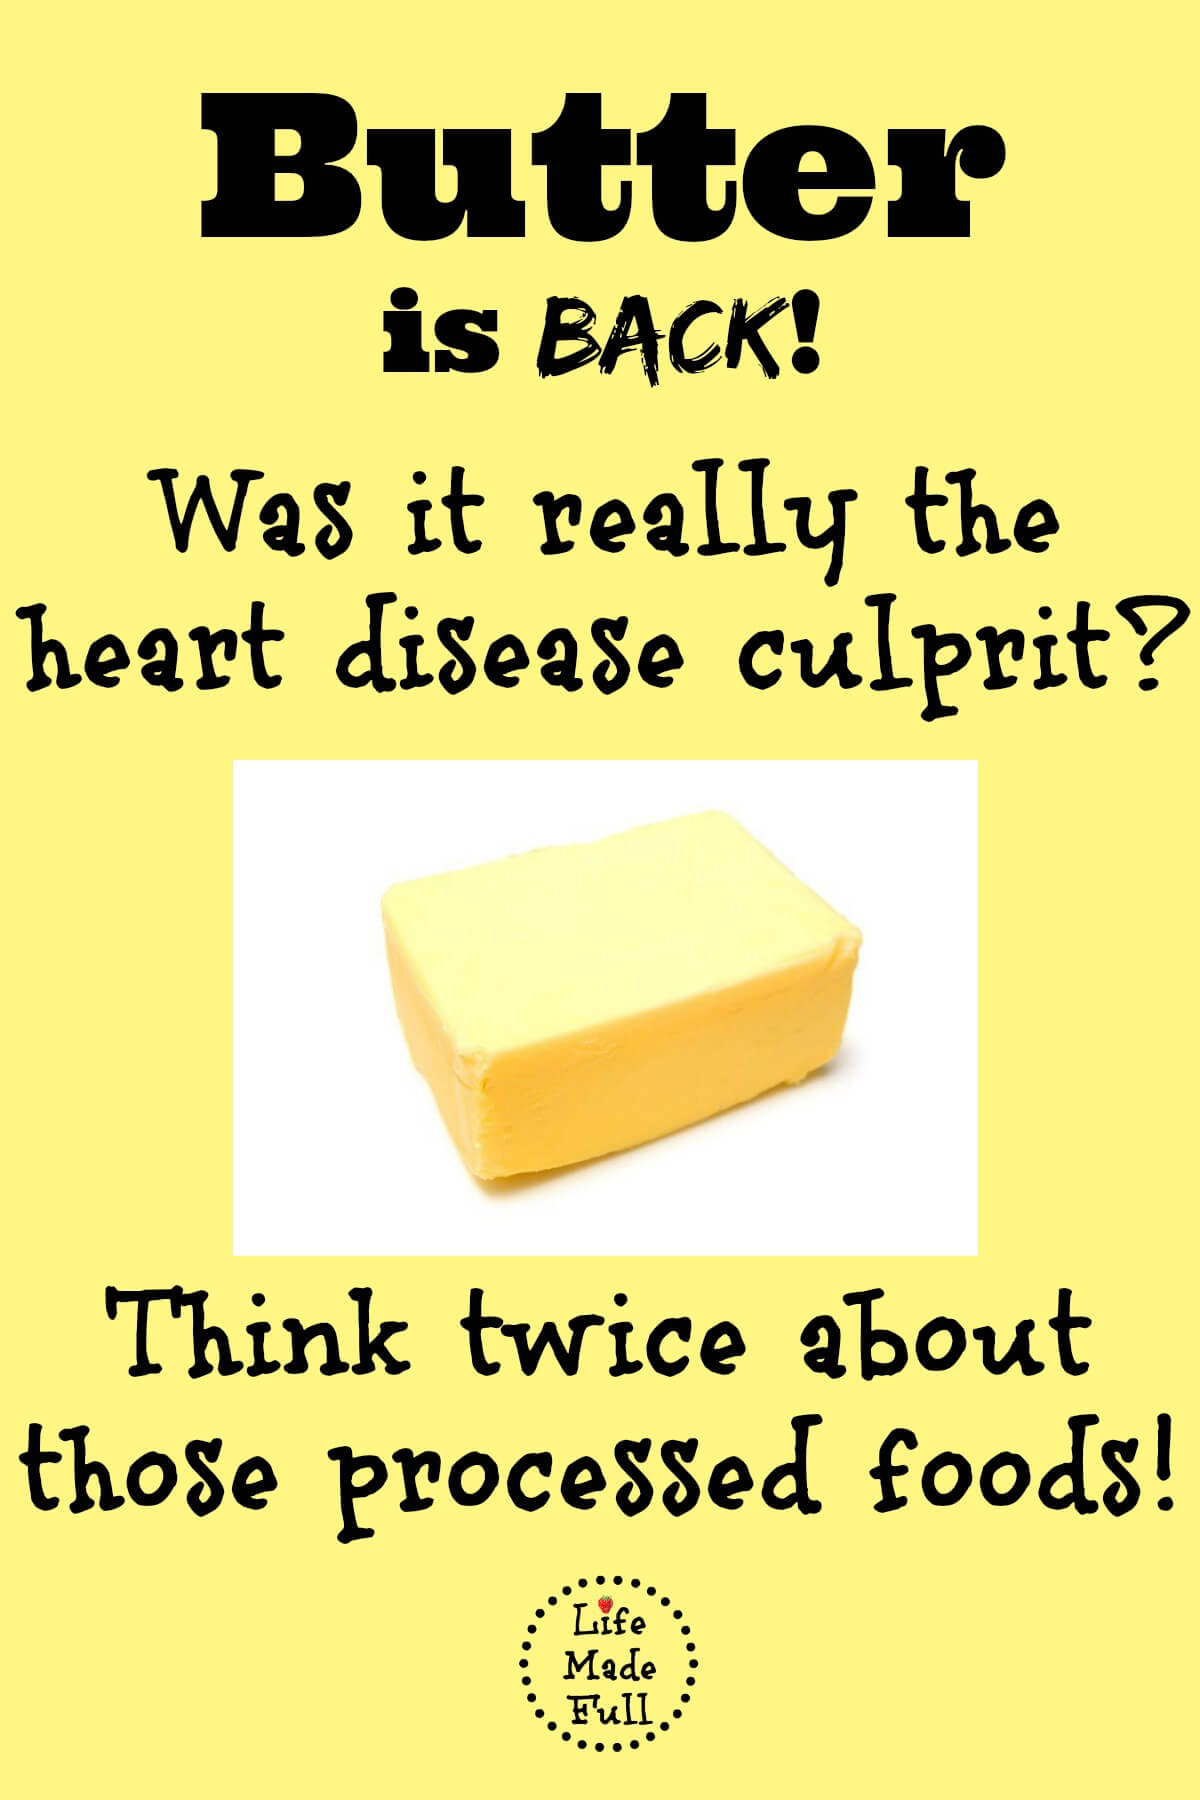 Butter Is Back—Processed Foods Are Identified as Real Culprits in Heart Disease